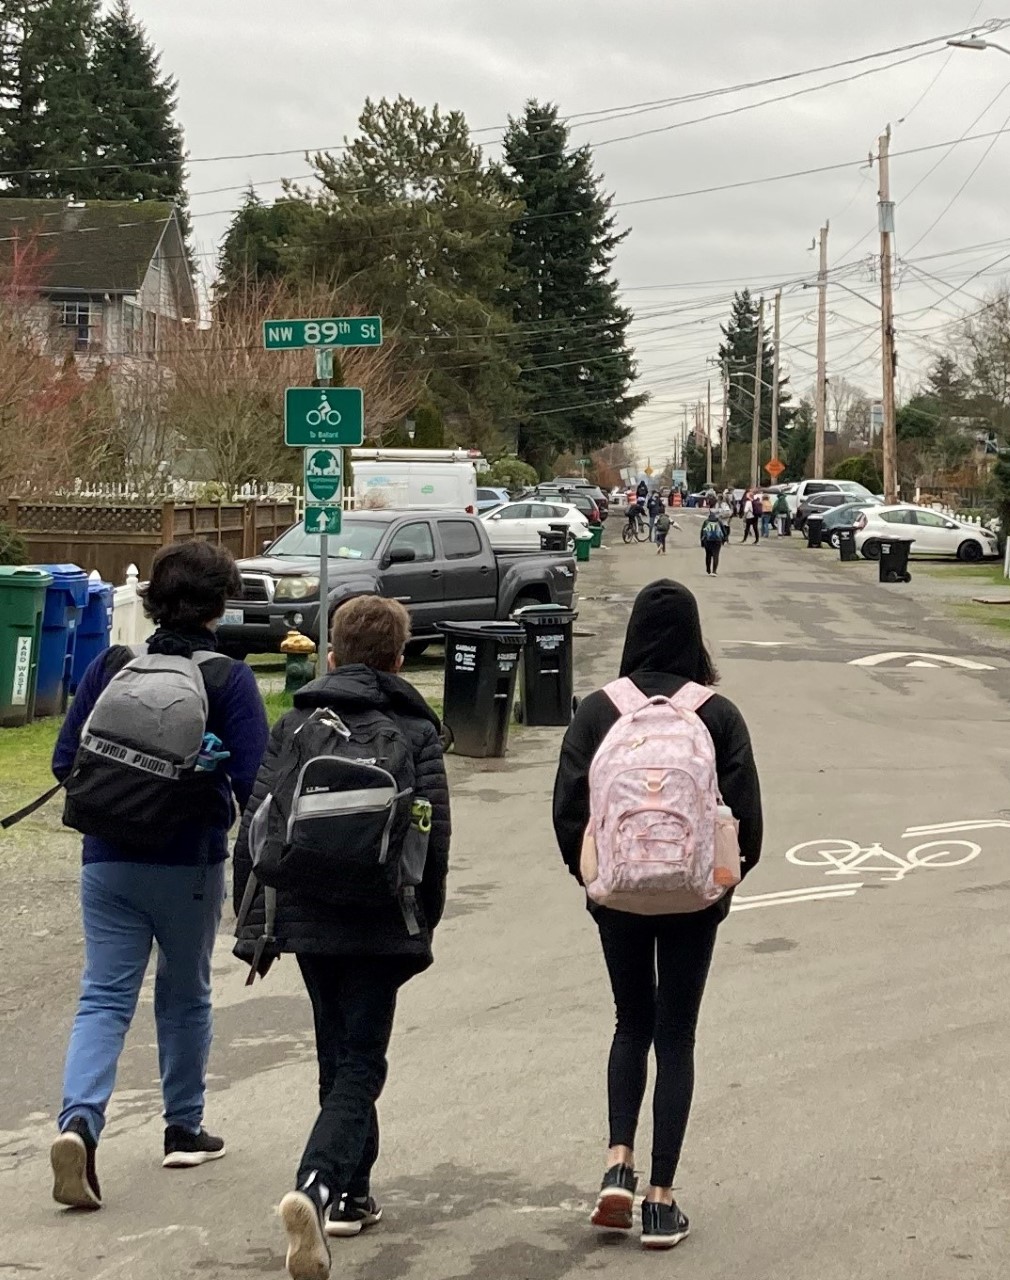 A group of students walk safely to school on a Stay Healthy Street in a residential neighborhood